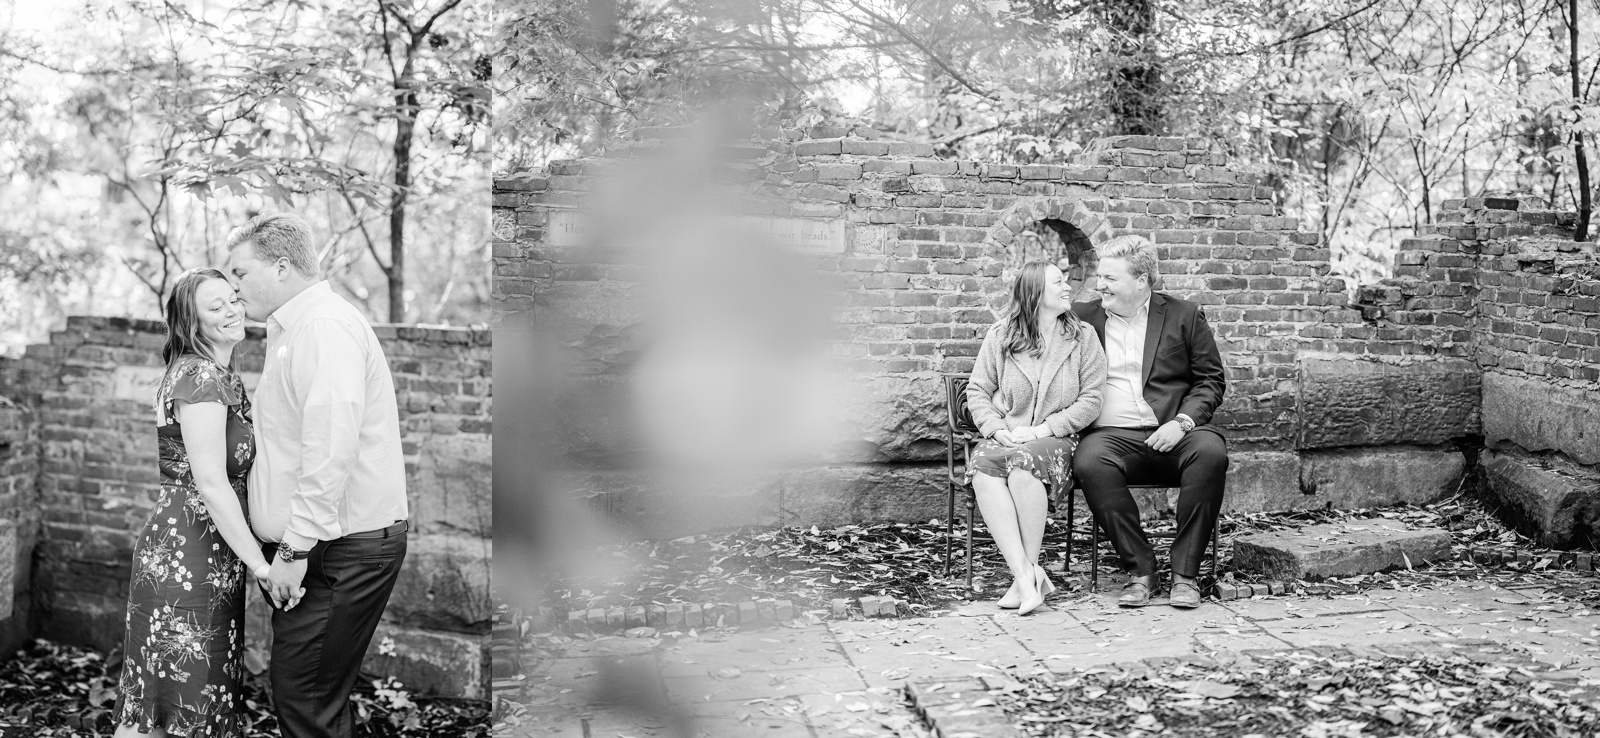 Fall Engagement Session at Inniswood and Westerville Ohio